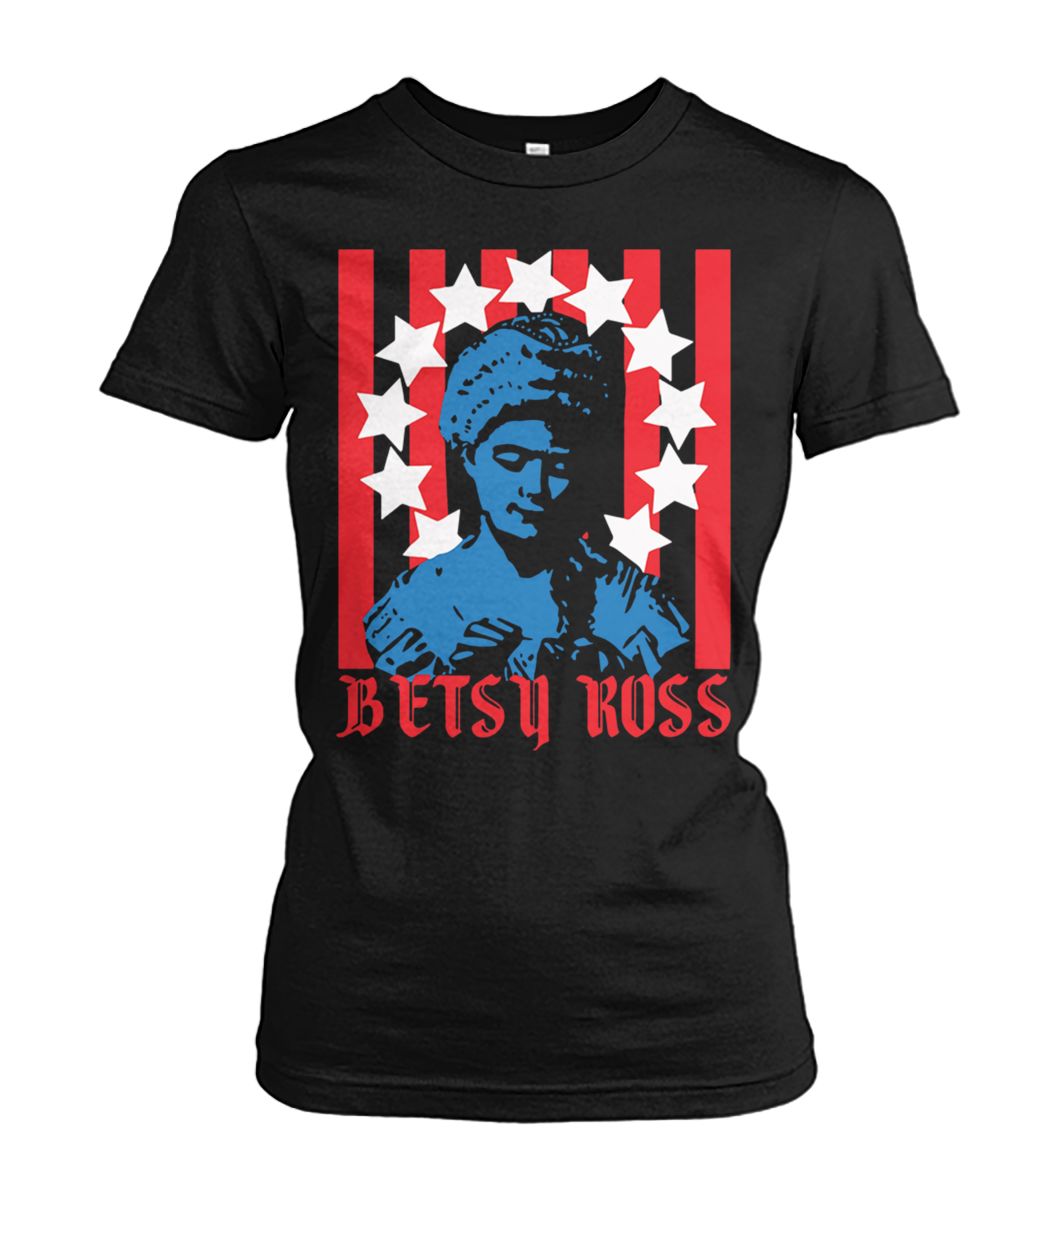 Betsy ross making the first american flag women's crew tee